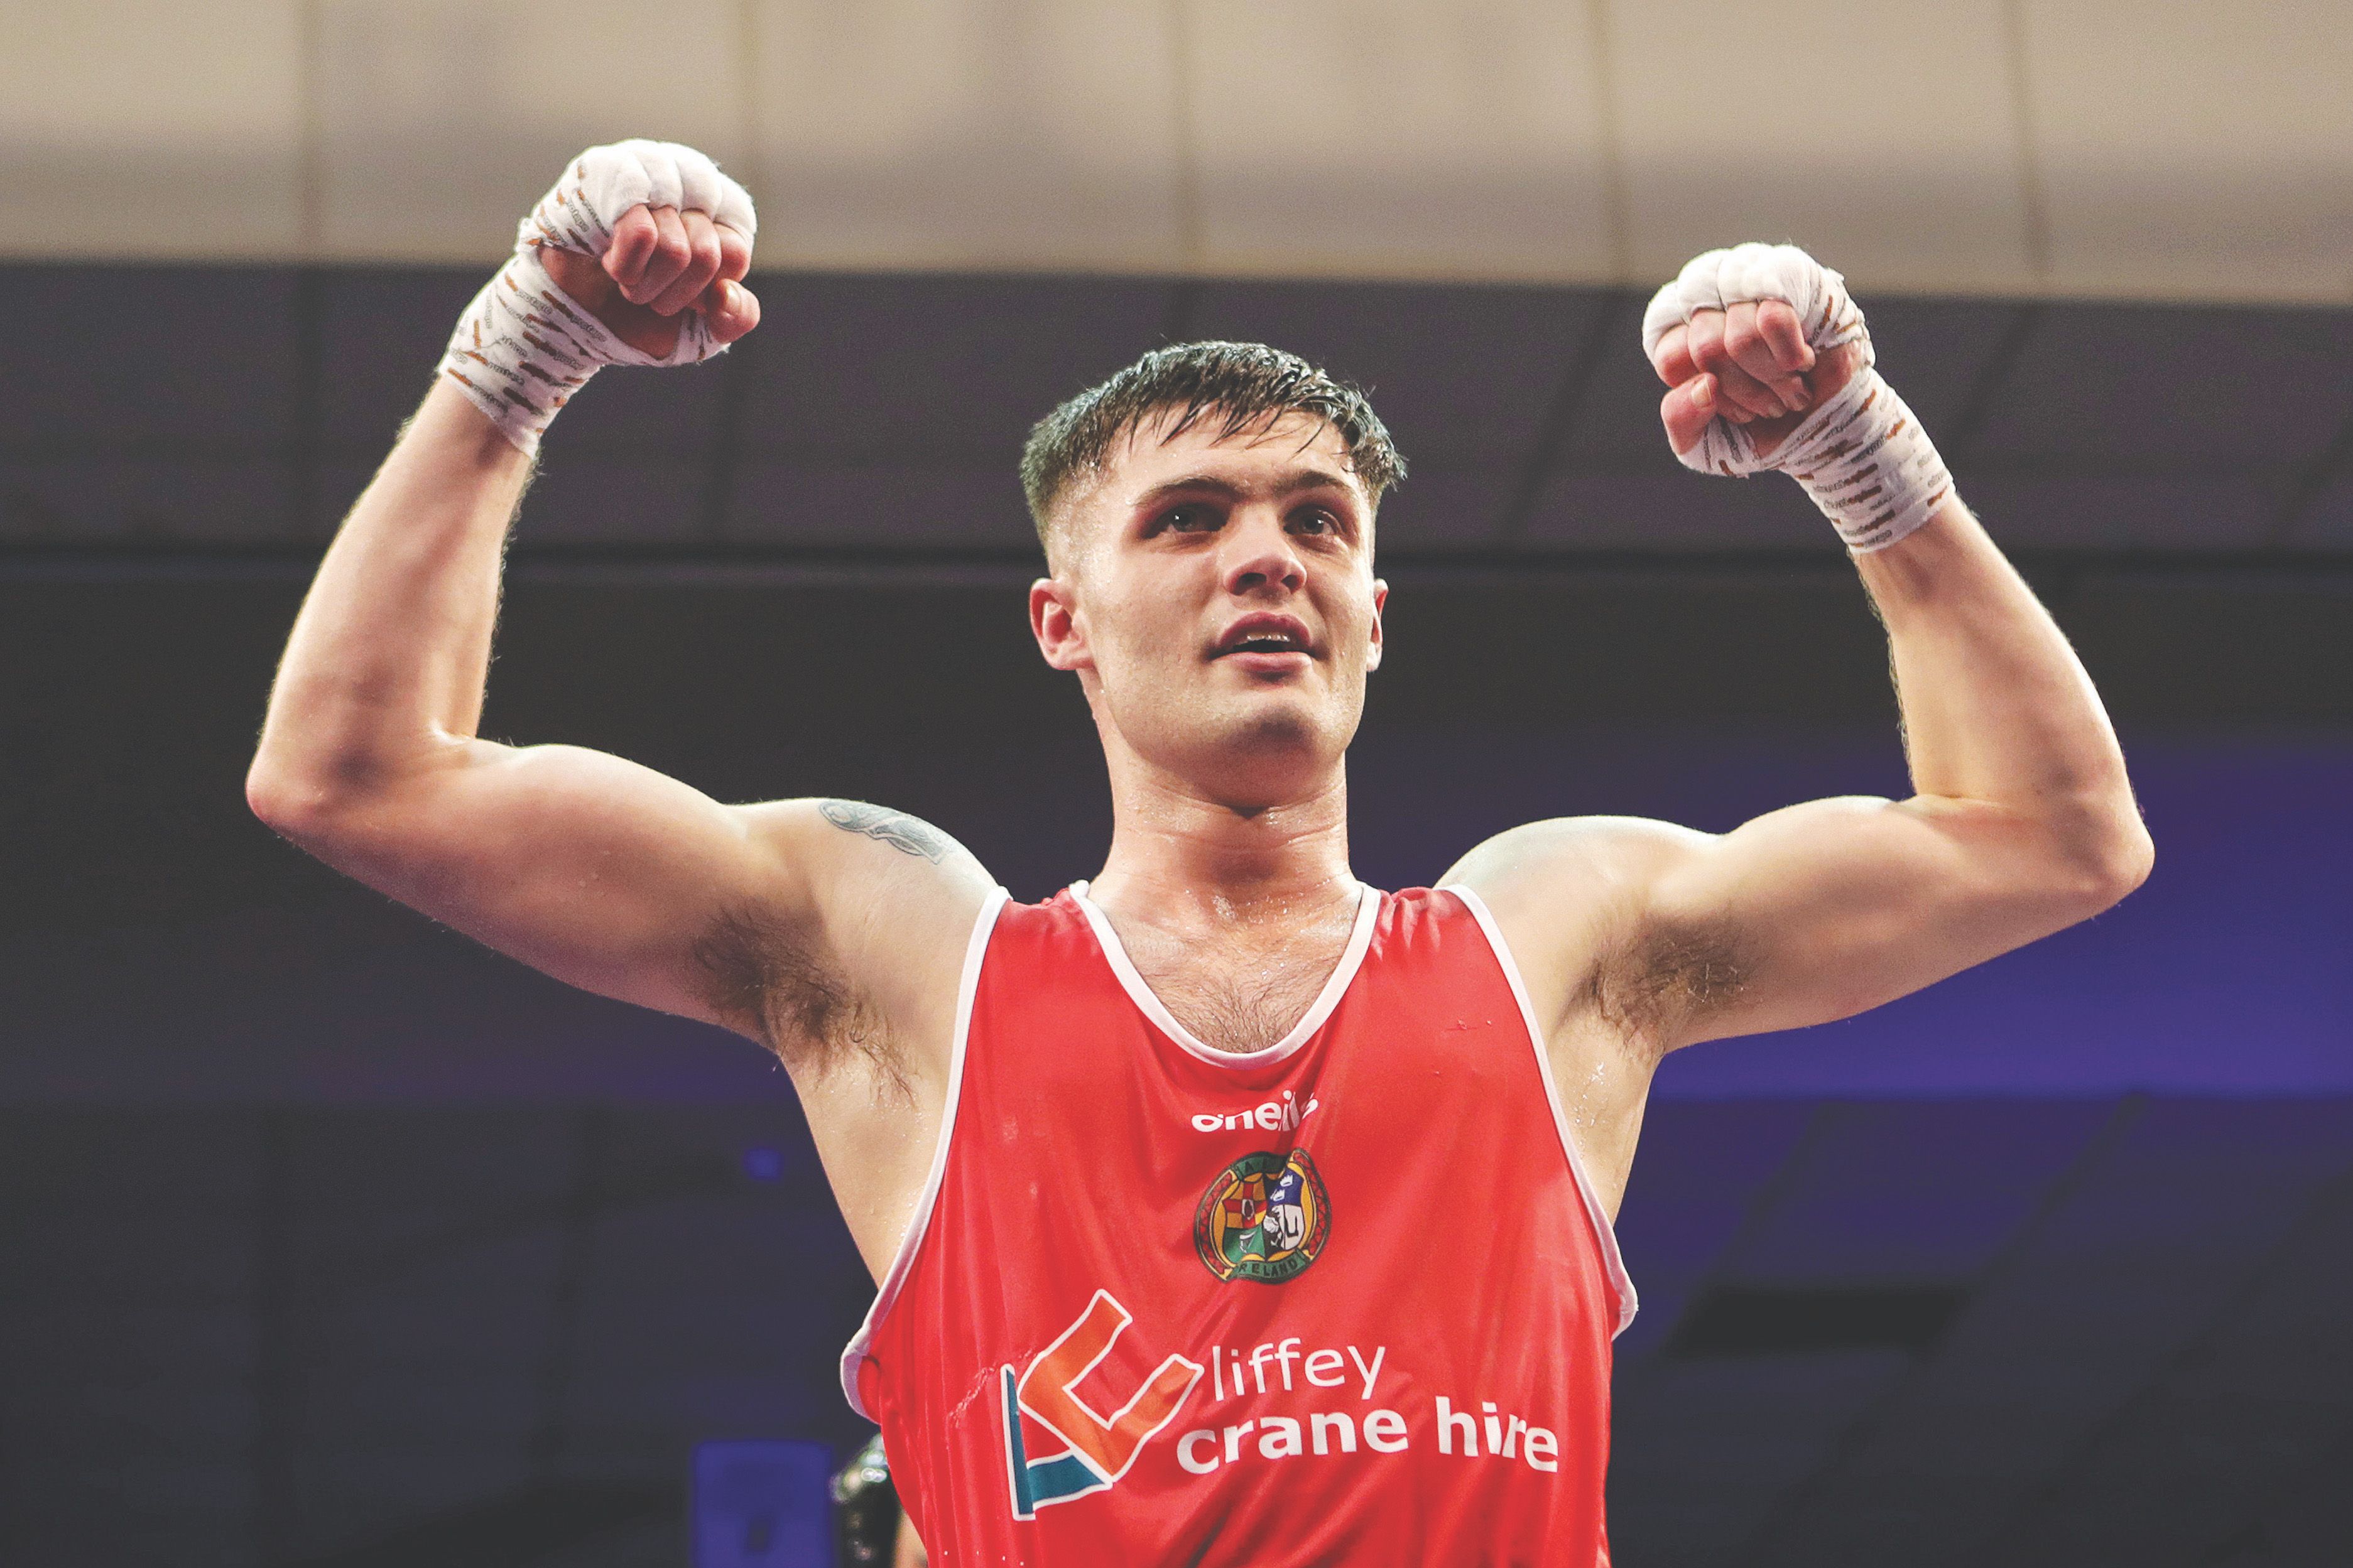 James McGivern was an amateur standout, but has ditched boxing in the vest and will instead set down the path of life as a pro